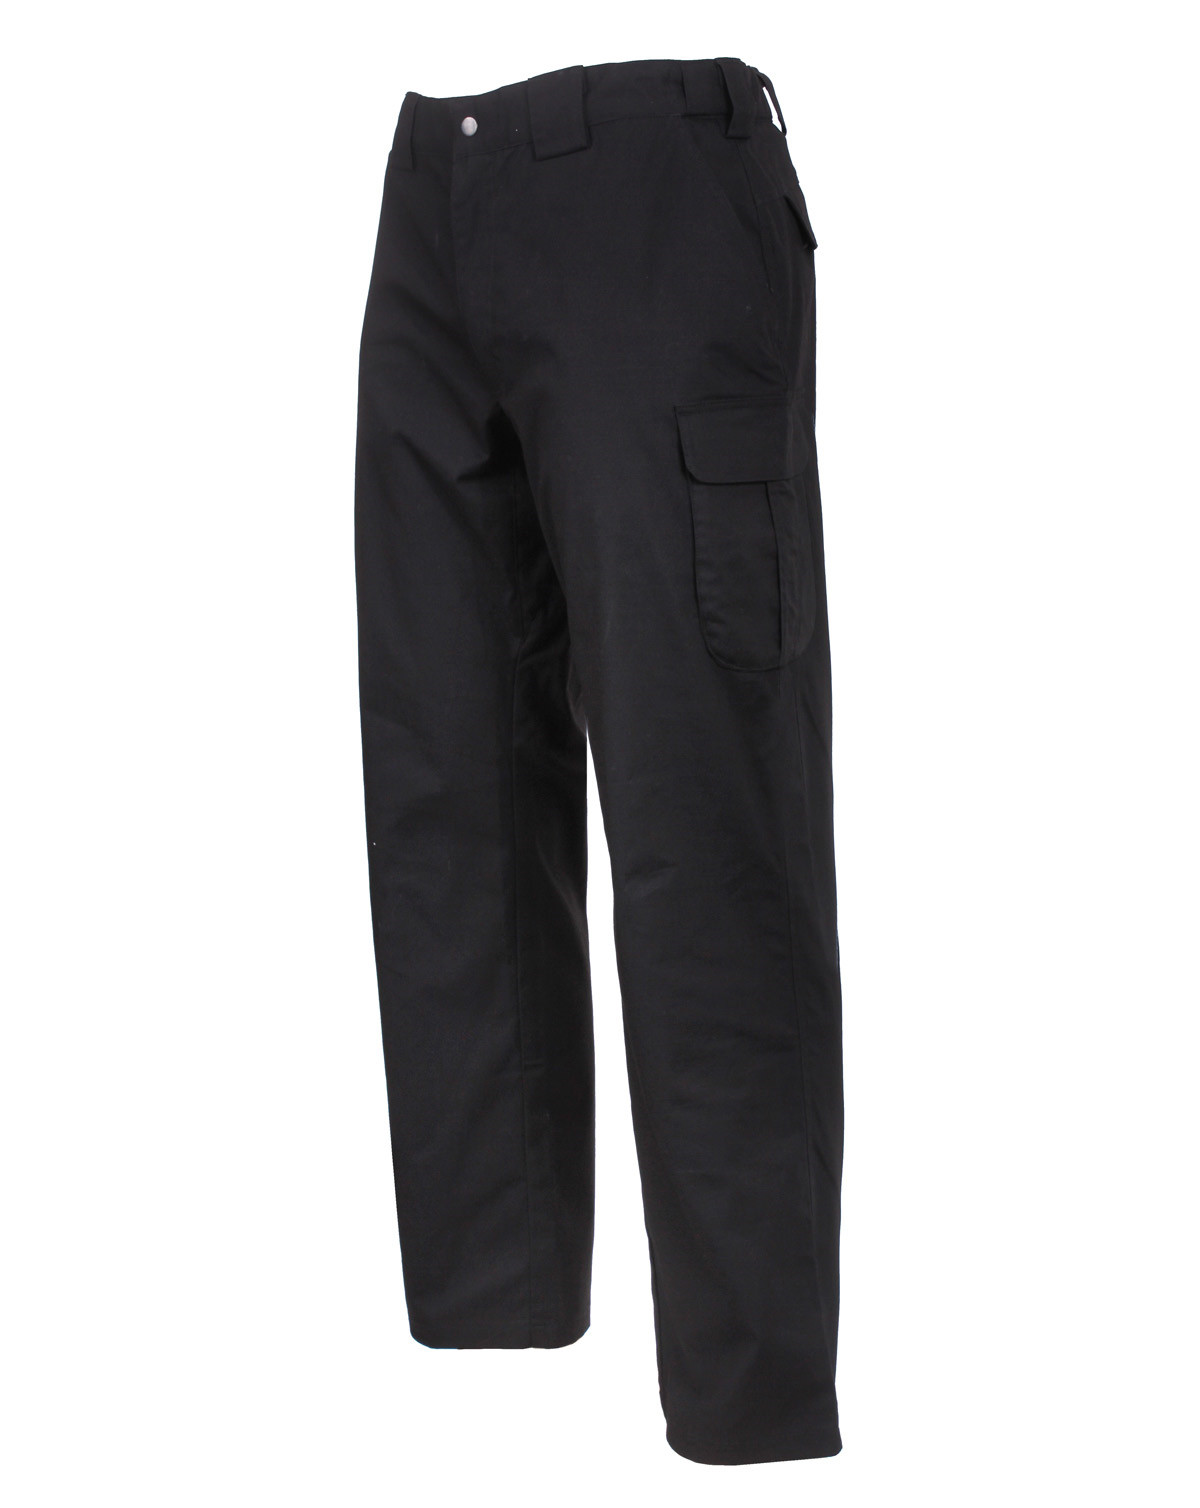 Rothco Tactical Field Bukser, Letvægts (Sort, W44)